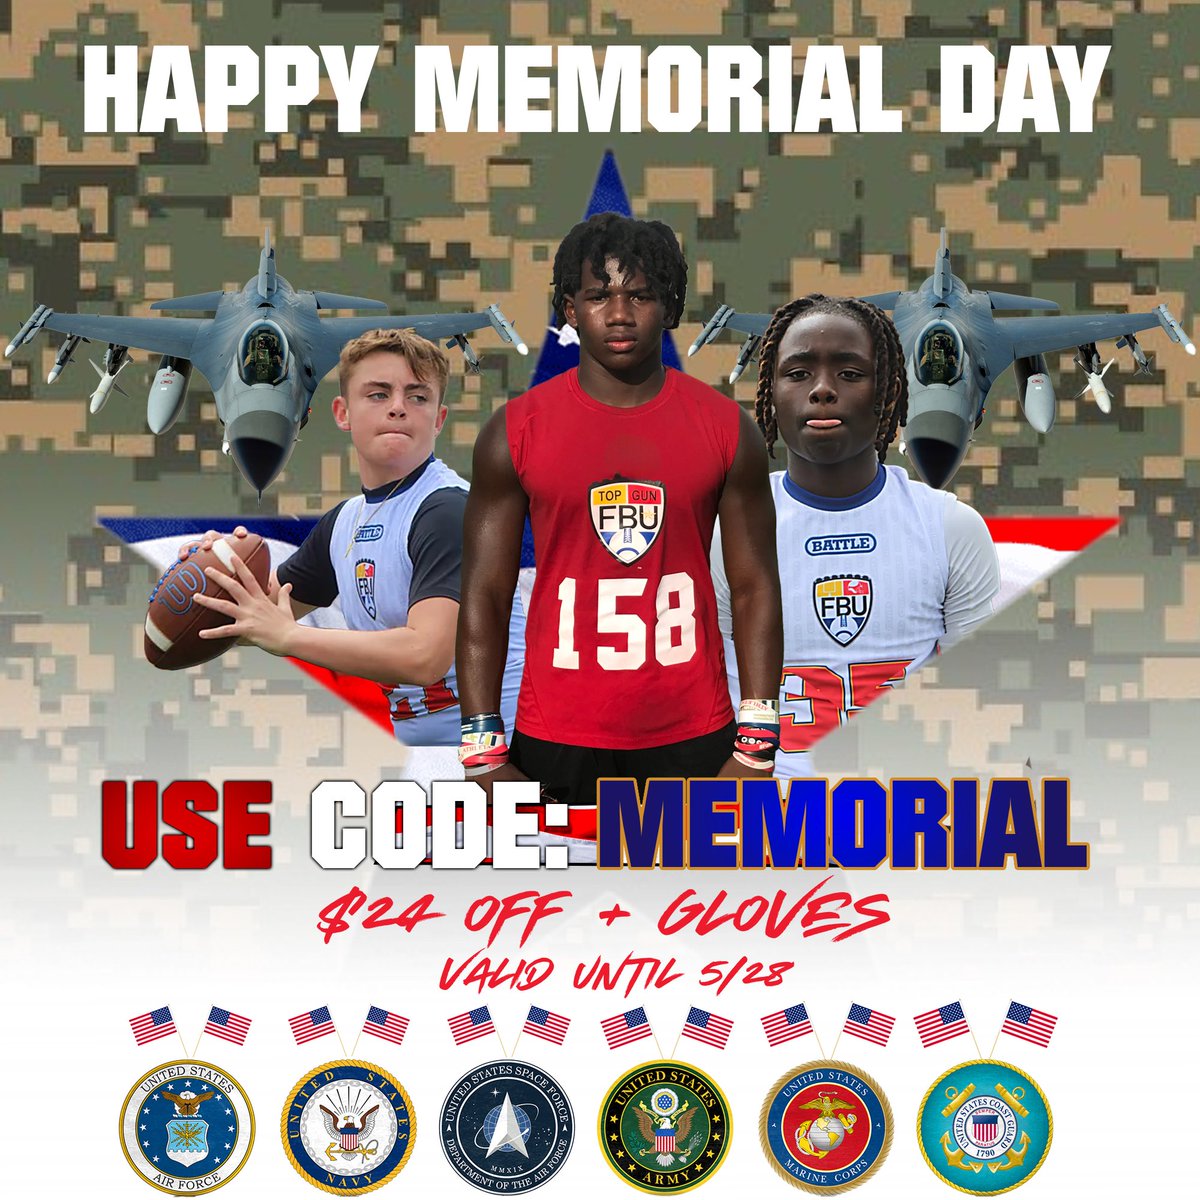 🇺🇸Happy Memorial Day THANK YOU to all that have served to protect our country 🫡 Today only, get $24 off + Free Gloves! Sign up 👇& use code: MEMORIAL footballuniversity.org